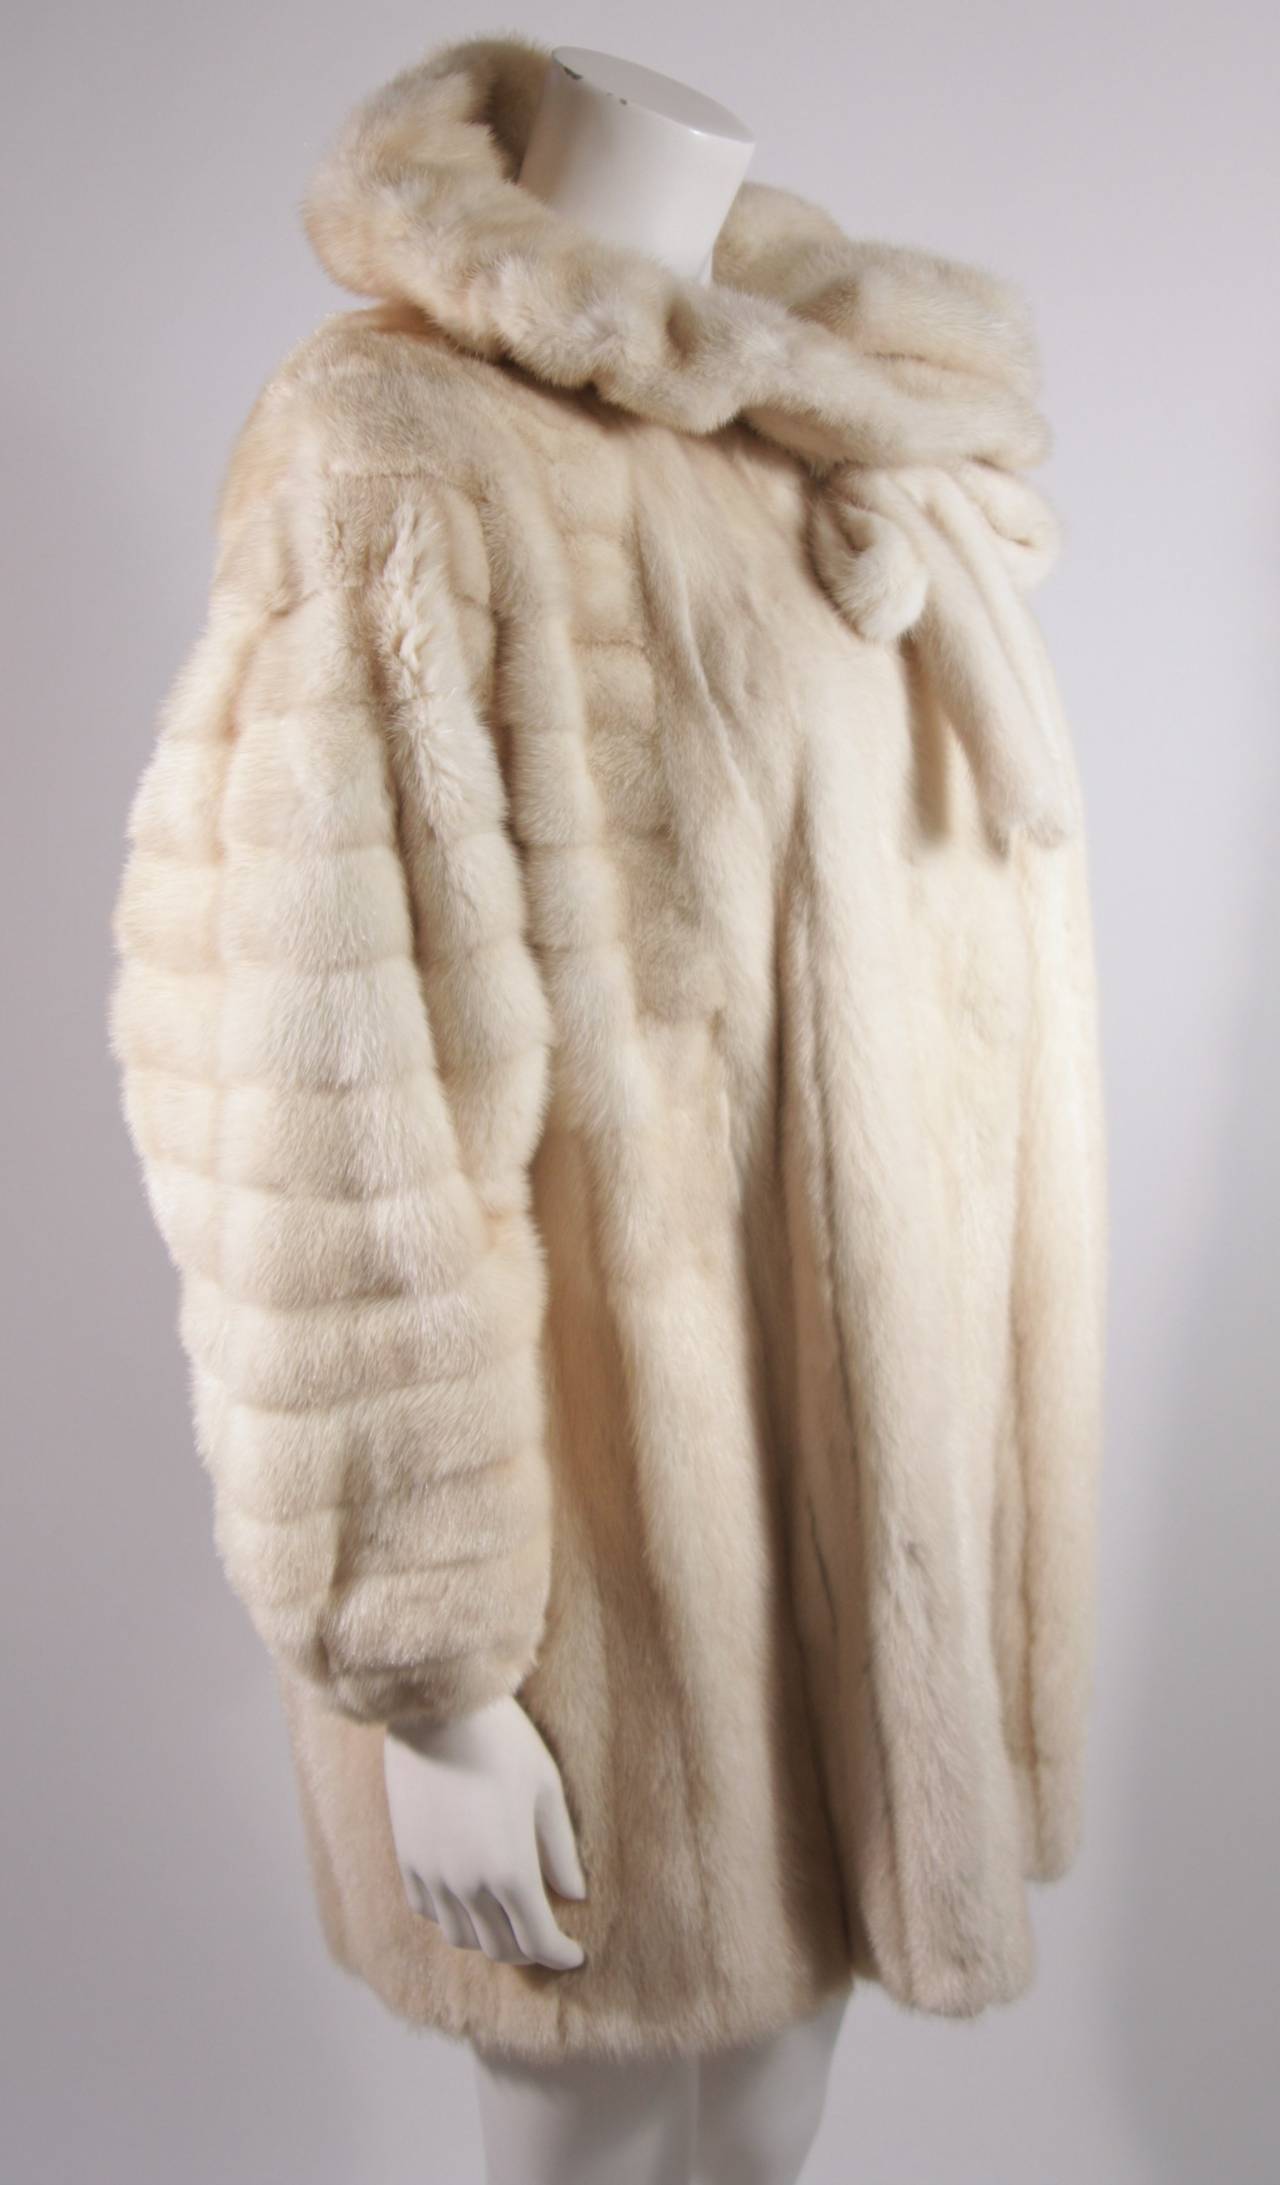 Women's Galanos Ivory Mink Coat with Ruffle Tie Collar and Full Sleeves & Stretch cuff For Sale